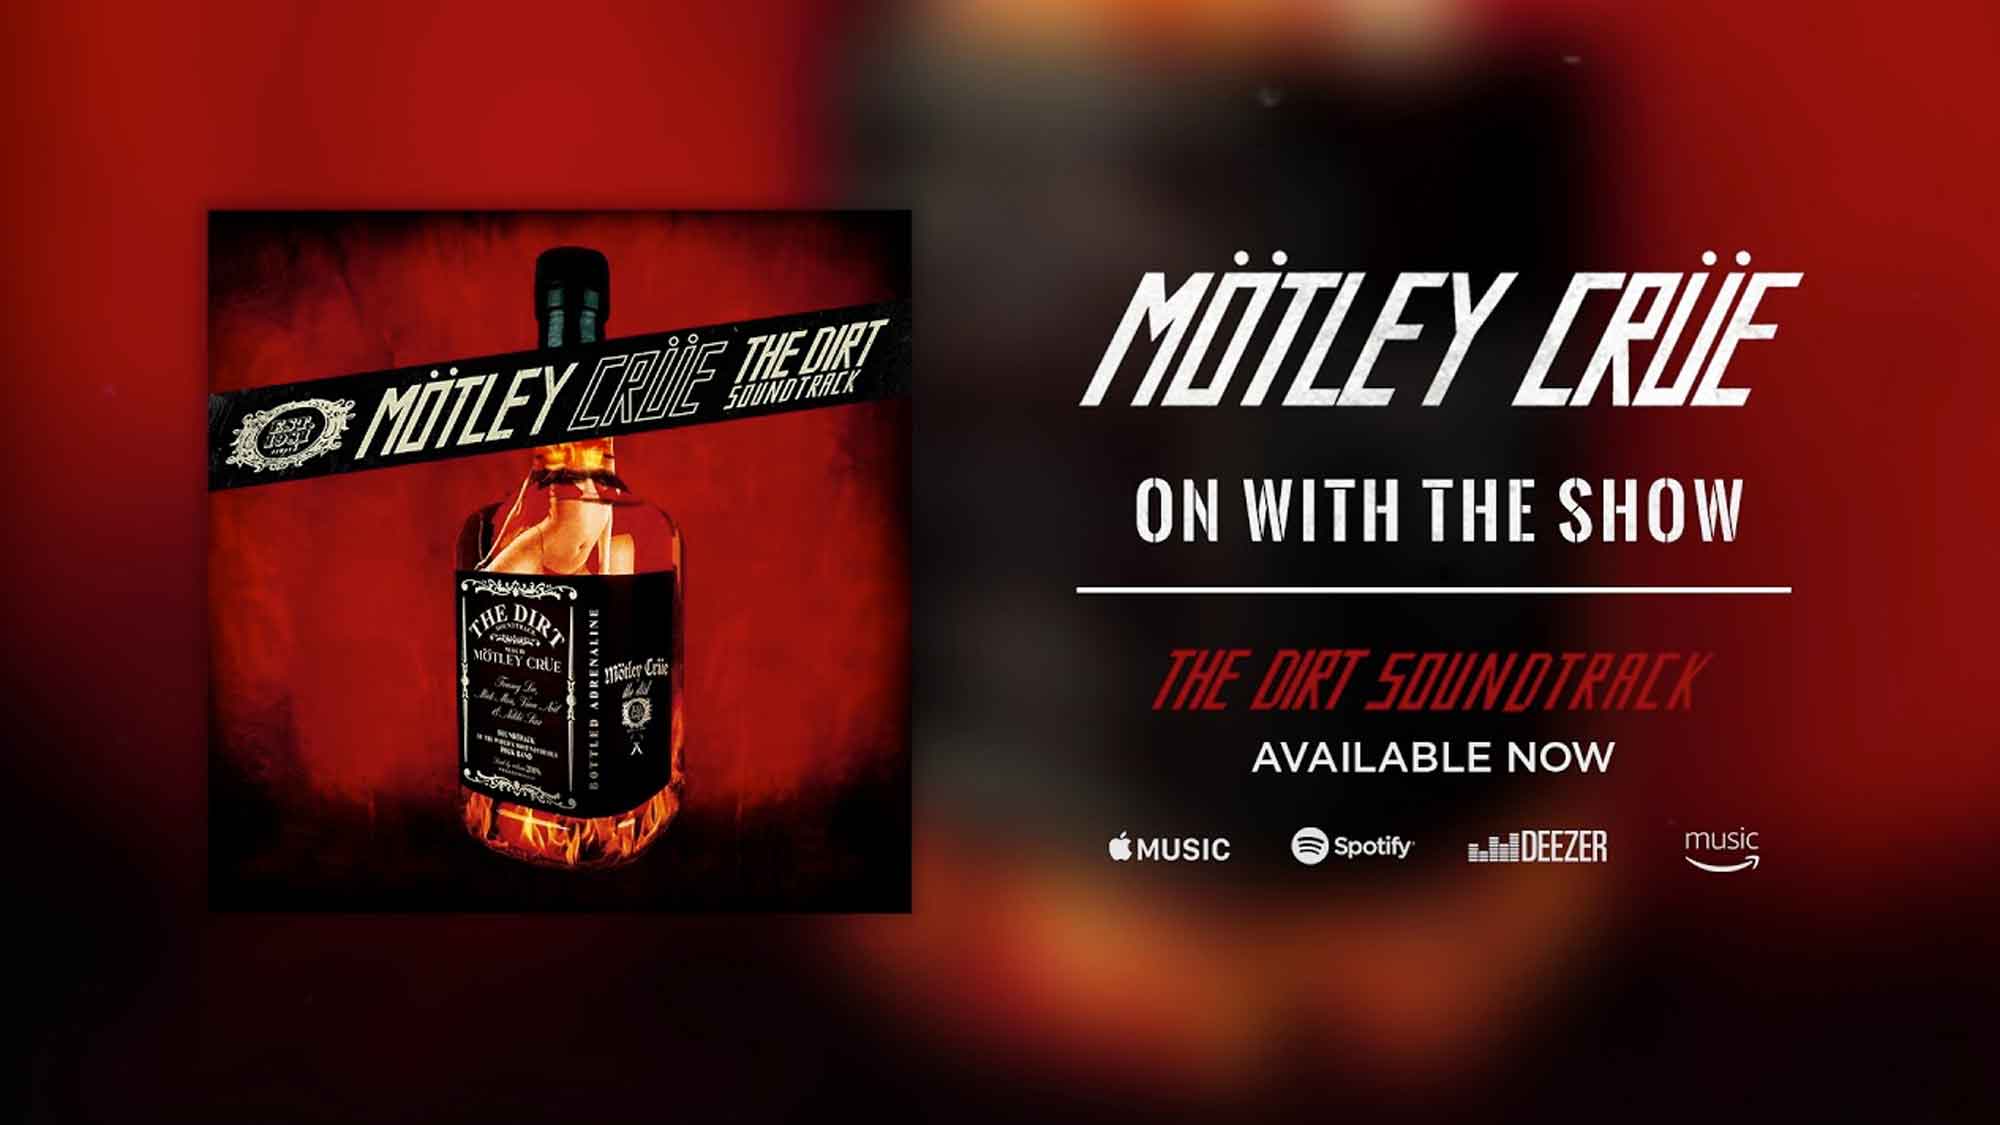 Motley Crue Songs - On With The Show 2